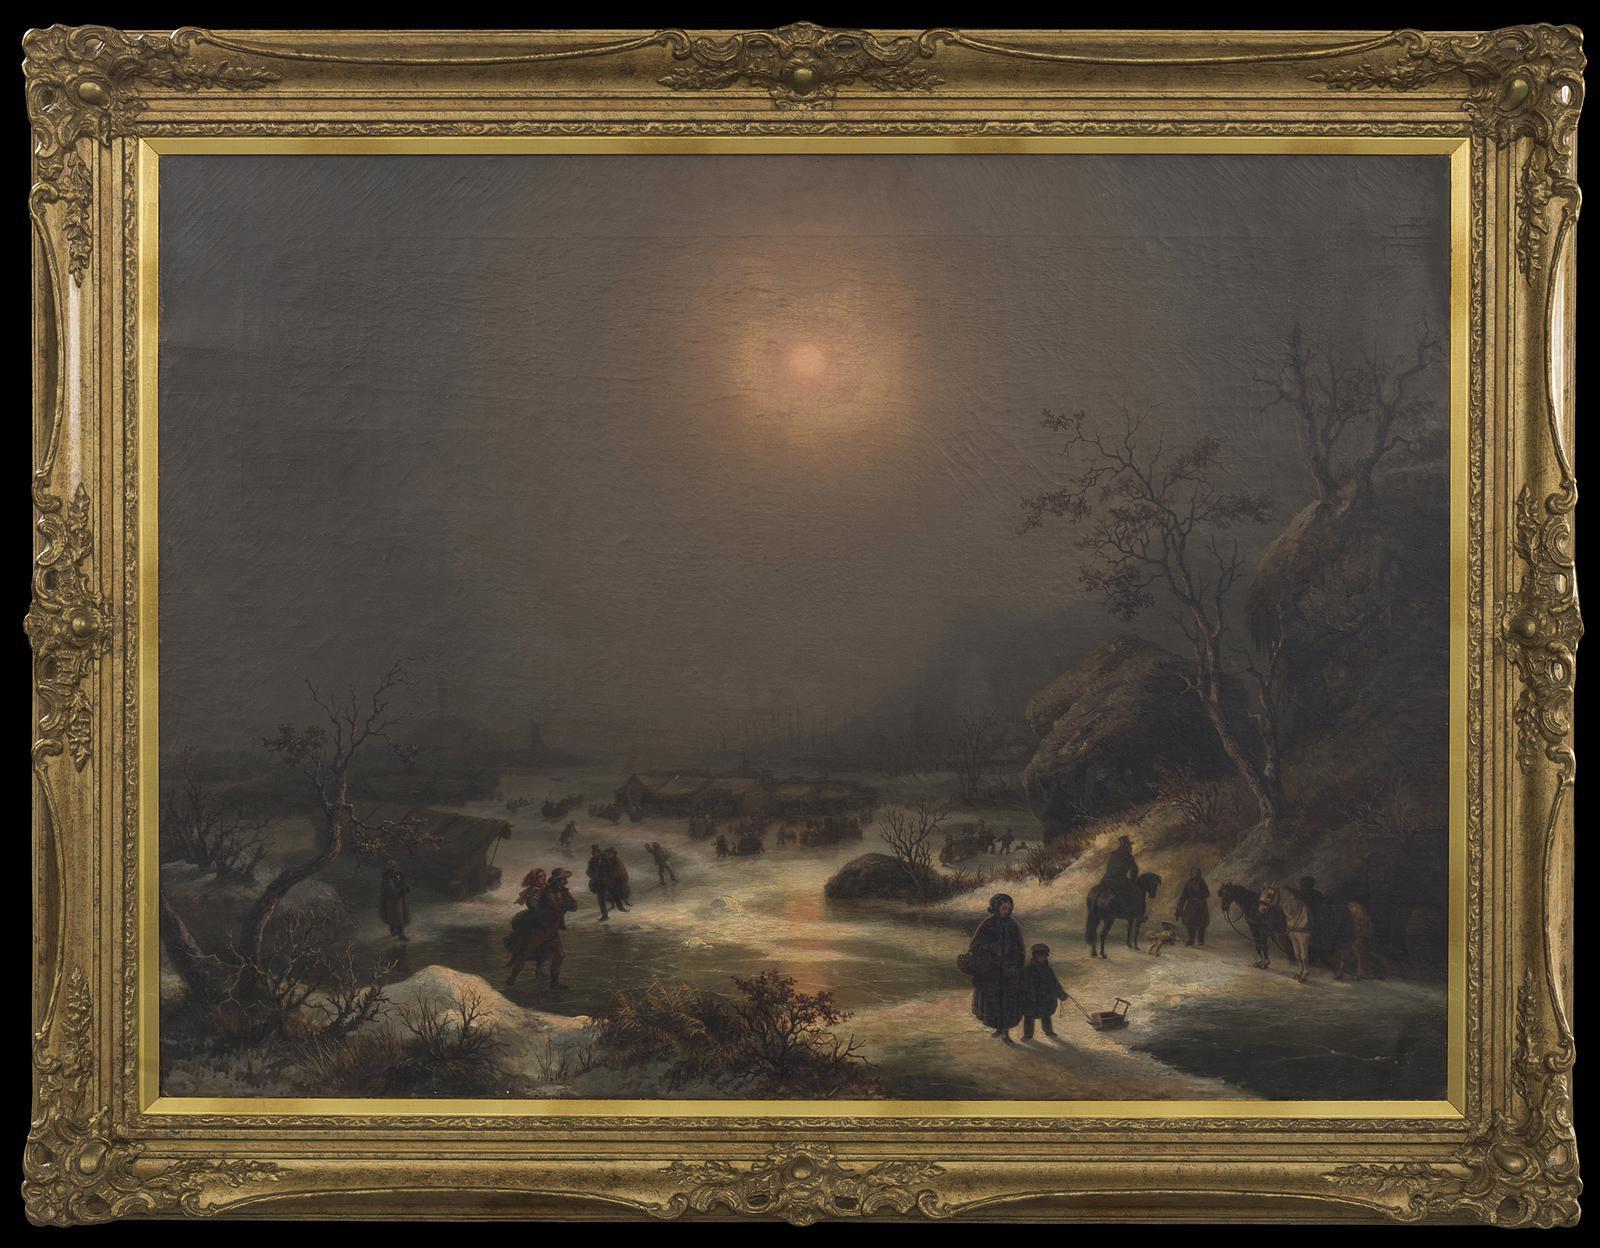 Northern Nocturnal Landscape - Oil on Canvas by J.F. Hesse - Mid 19th Century - Painting by Johann Friedrich Hesse